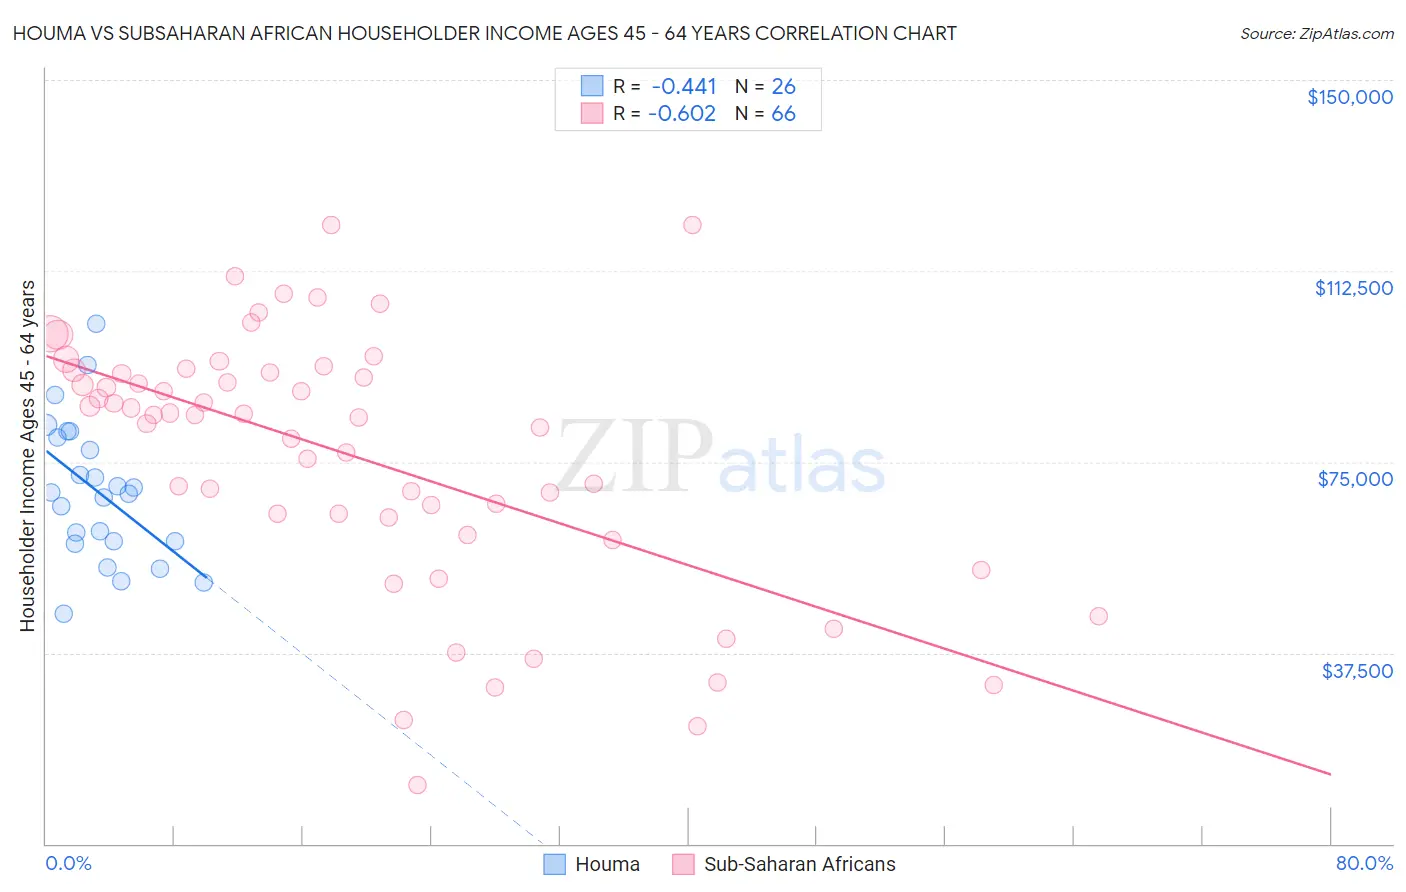 Houma vs Subsaharan African Householder Income Ages 45 - 64 years